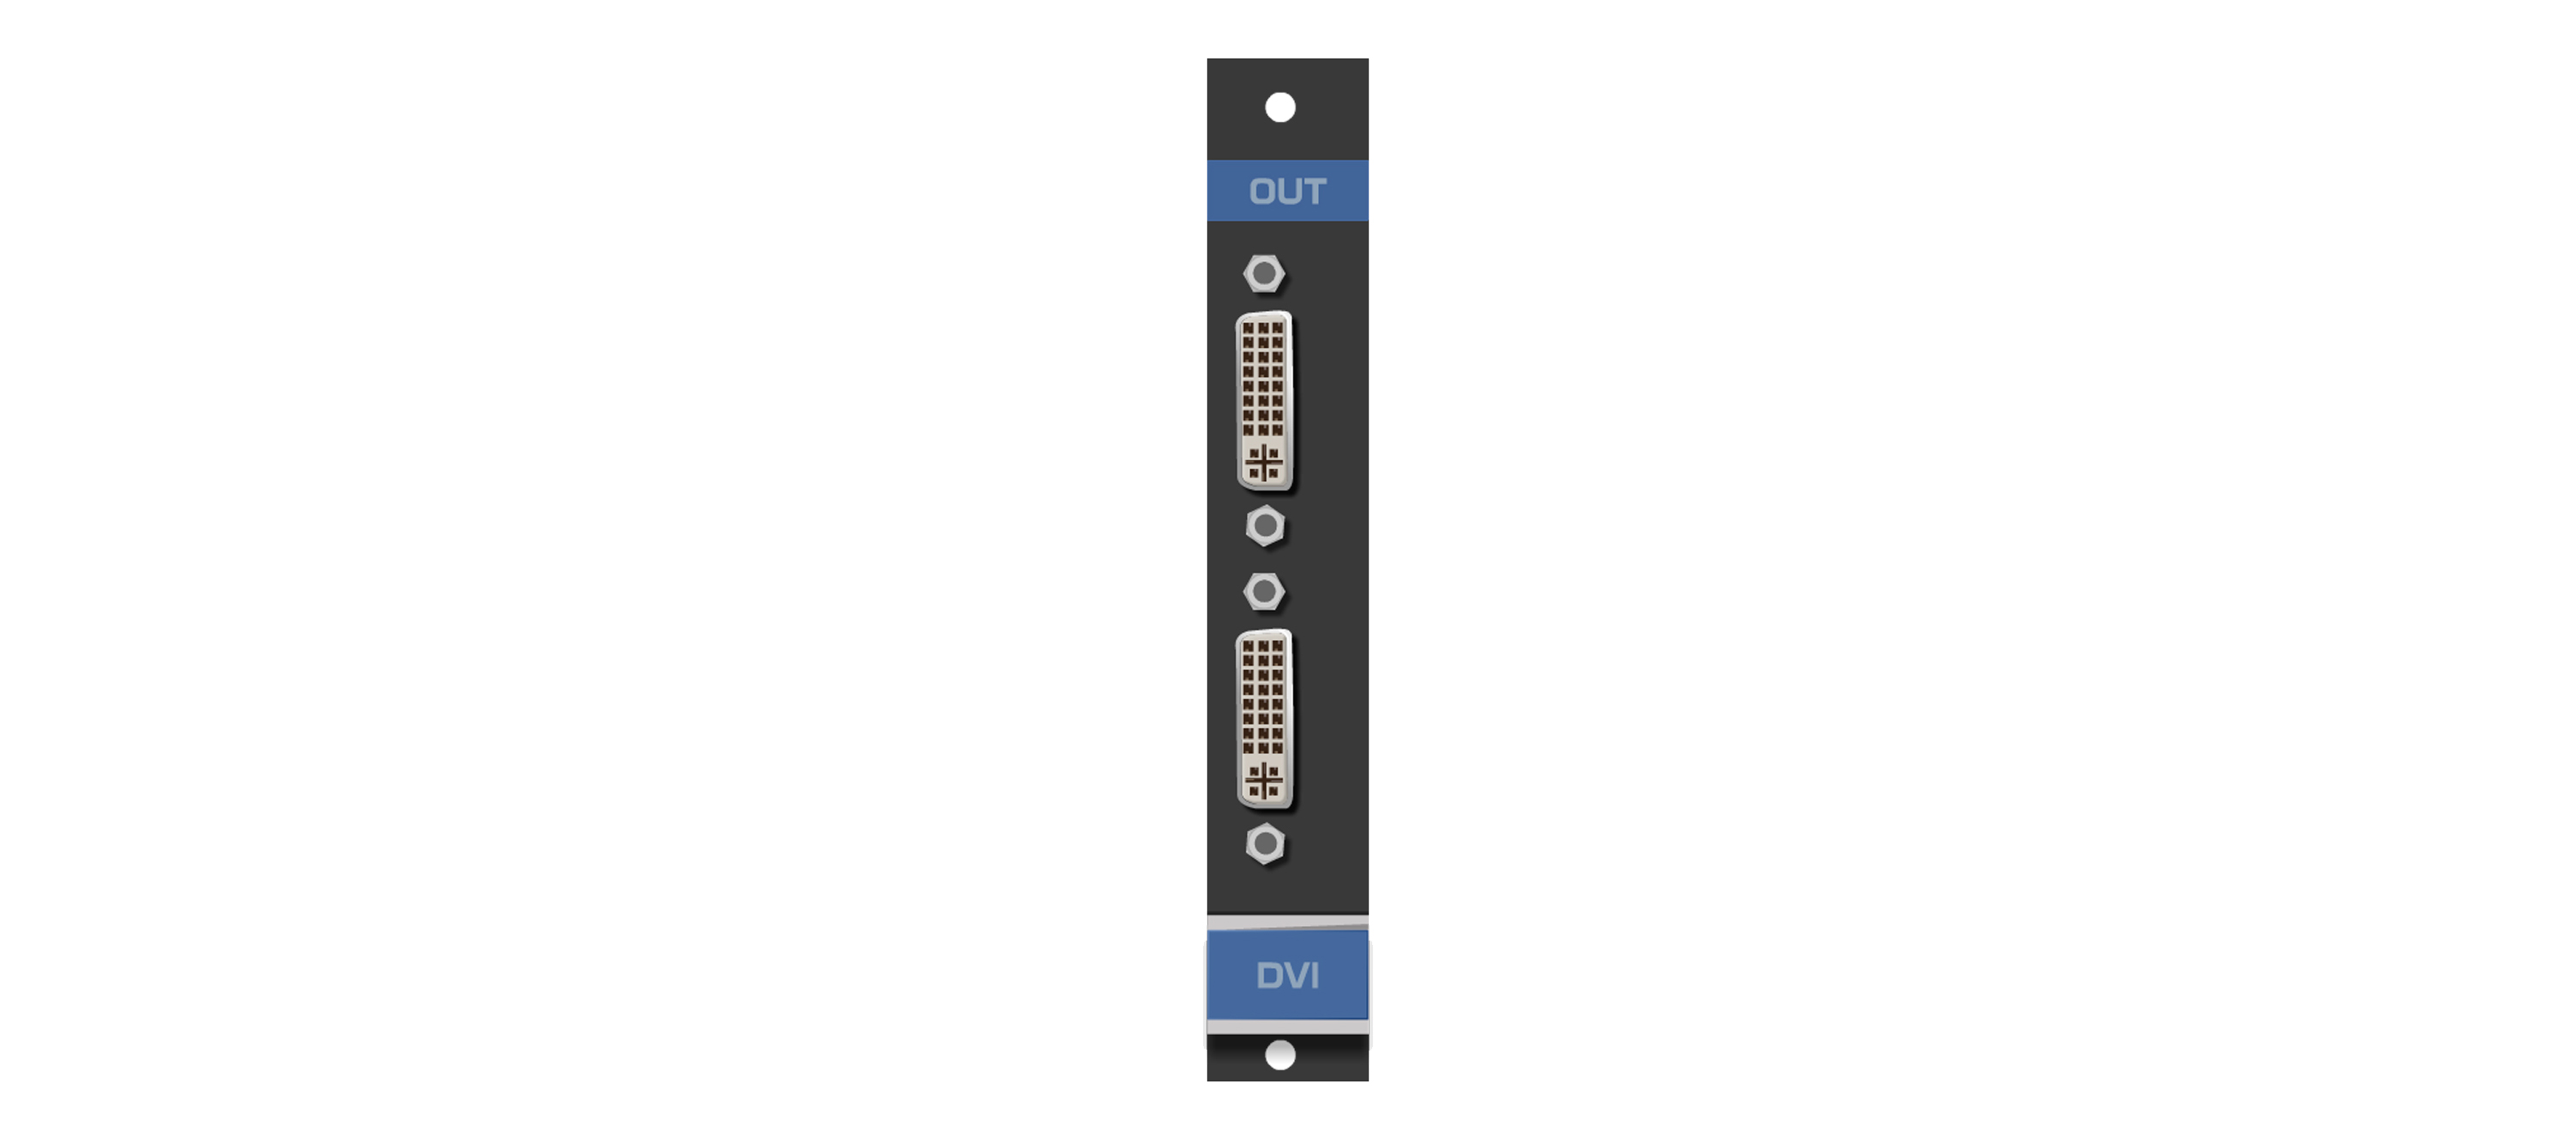 DVI-OUT2-F16/STANDALONE 2–Channel DVI Output Card